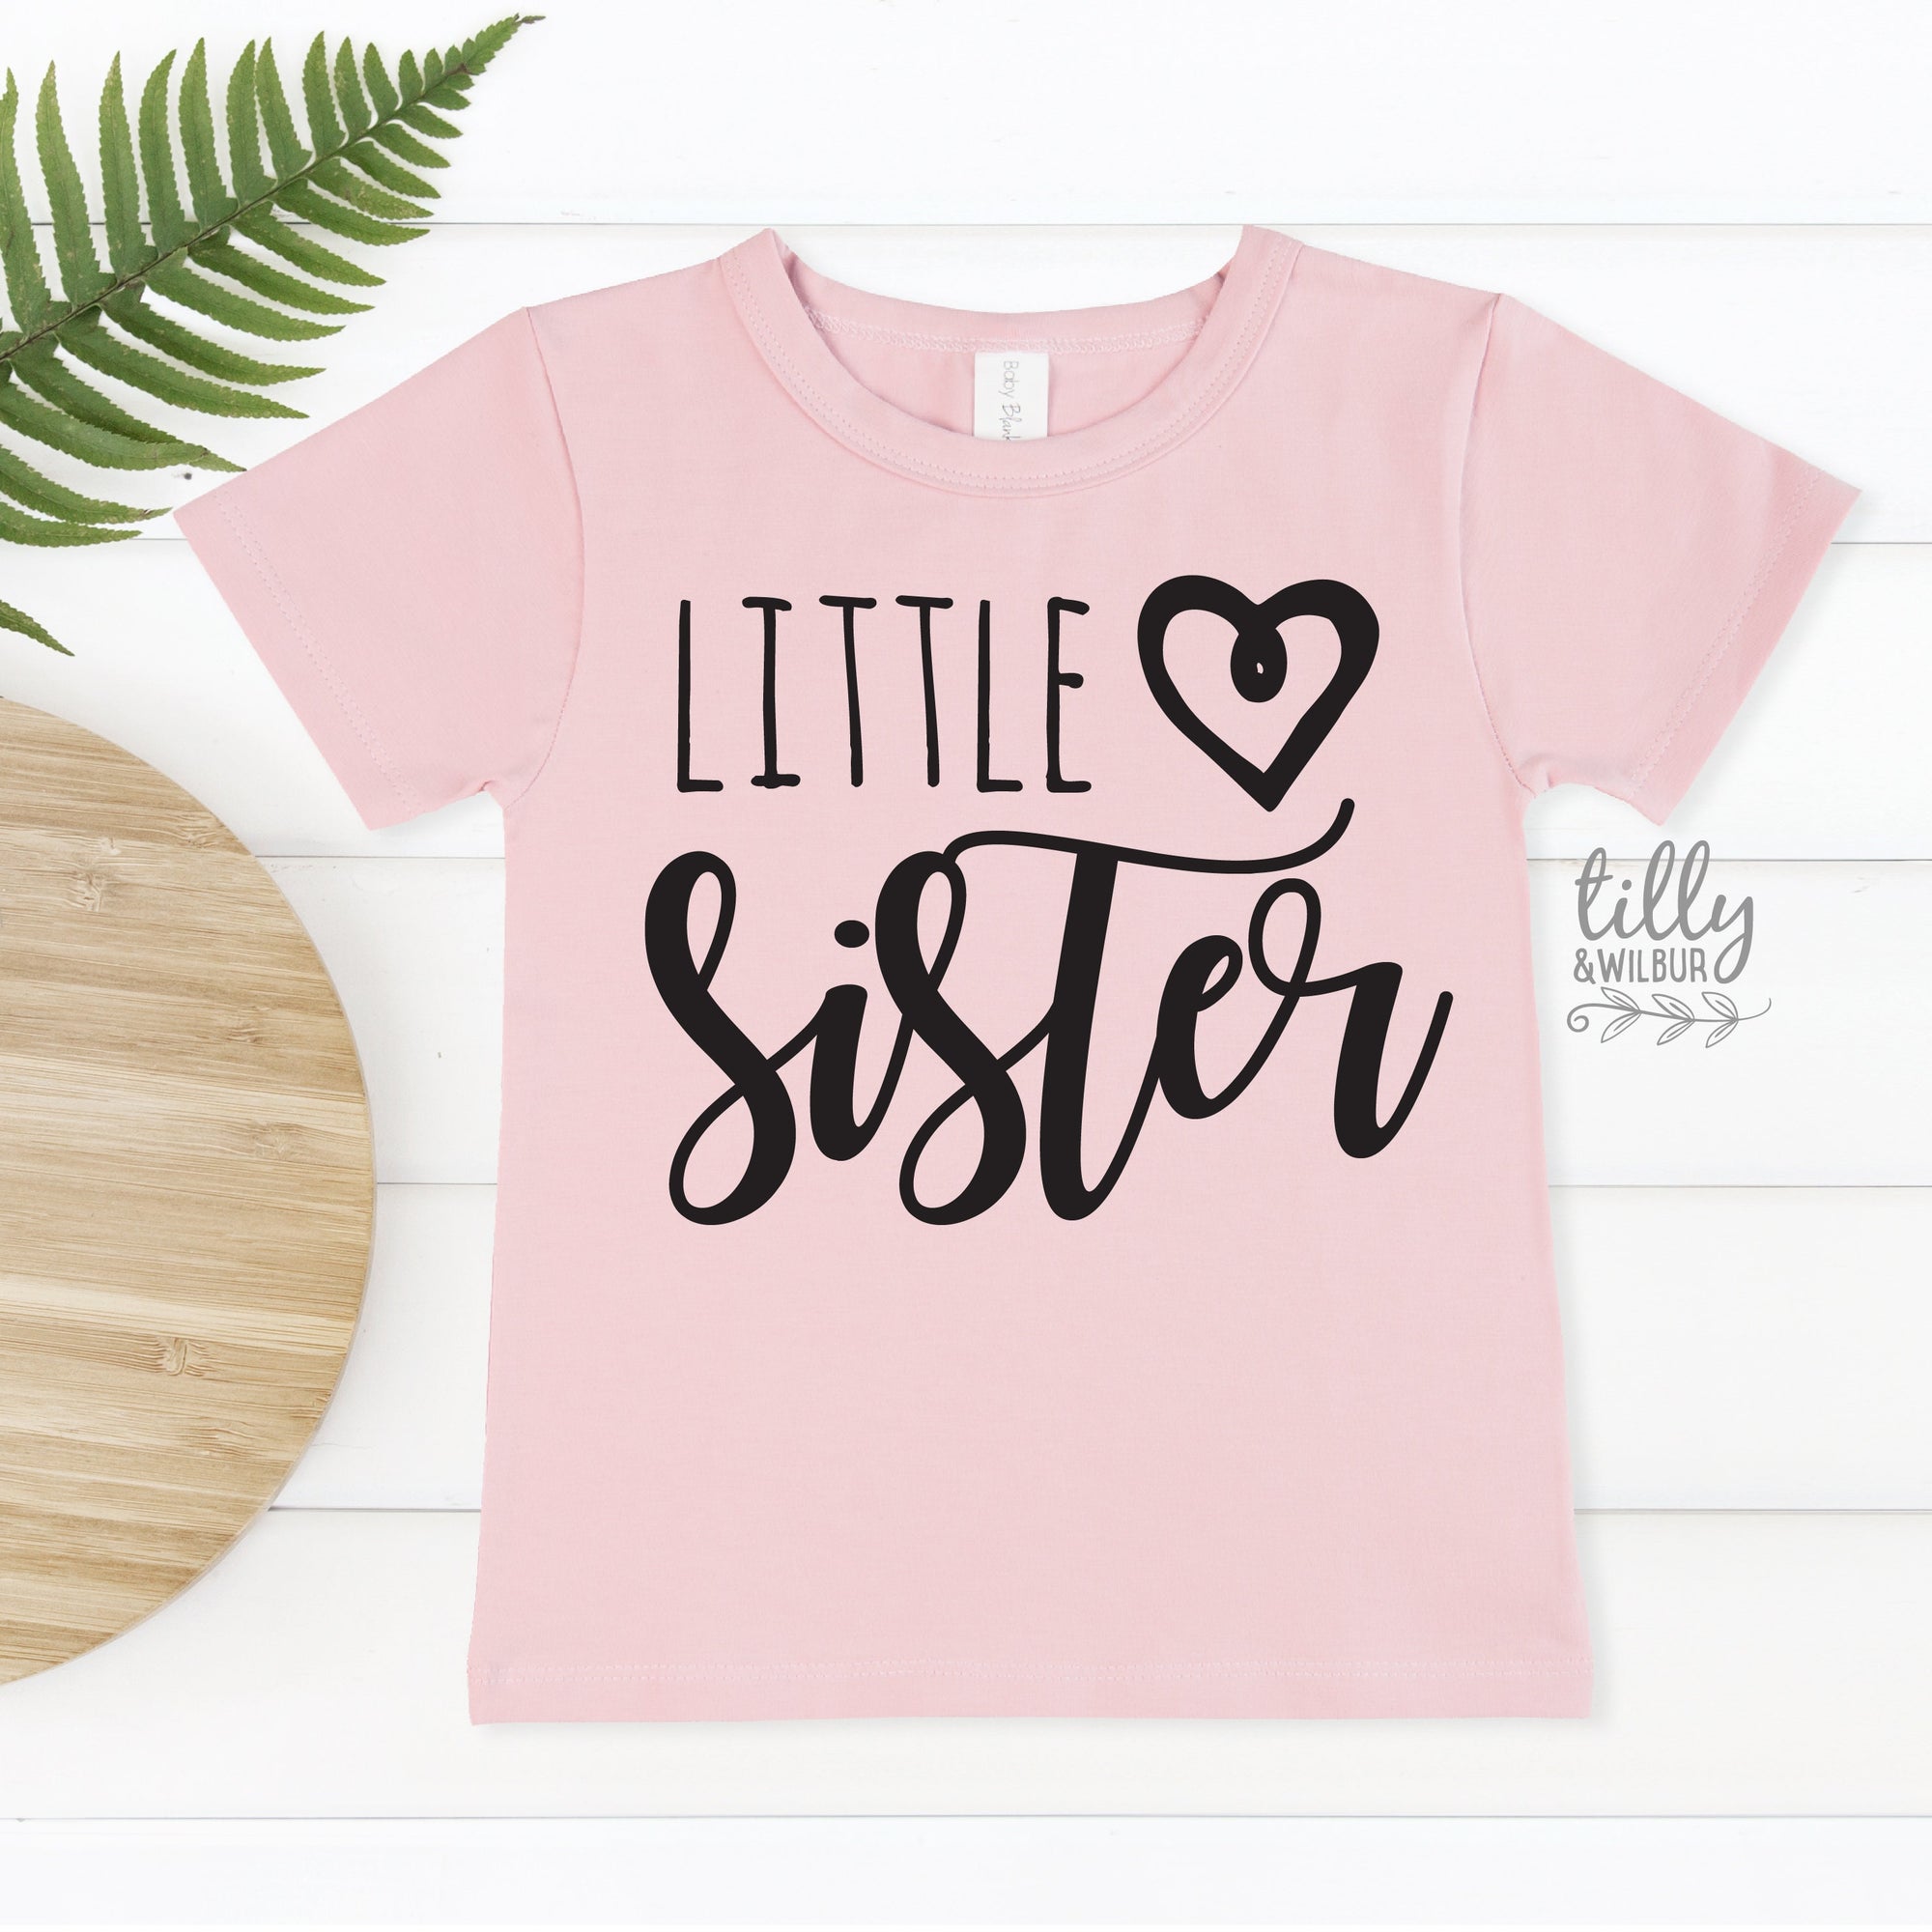 Little Sister T-Shirt, Matching Sister Outfits, Sibling T-Shirts, Matching Big Sister Little Sister T-Shirts, New Baby Sister Gift, Newborn